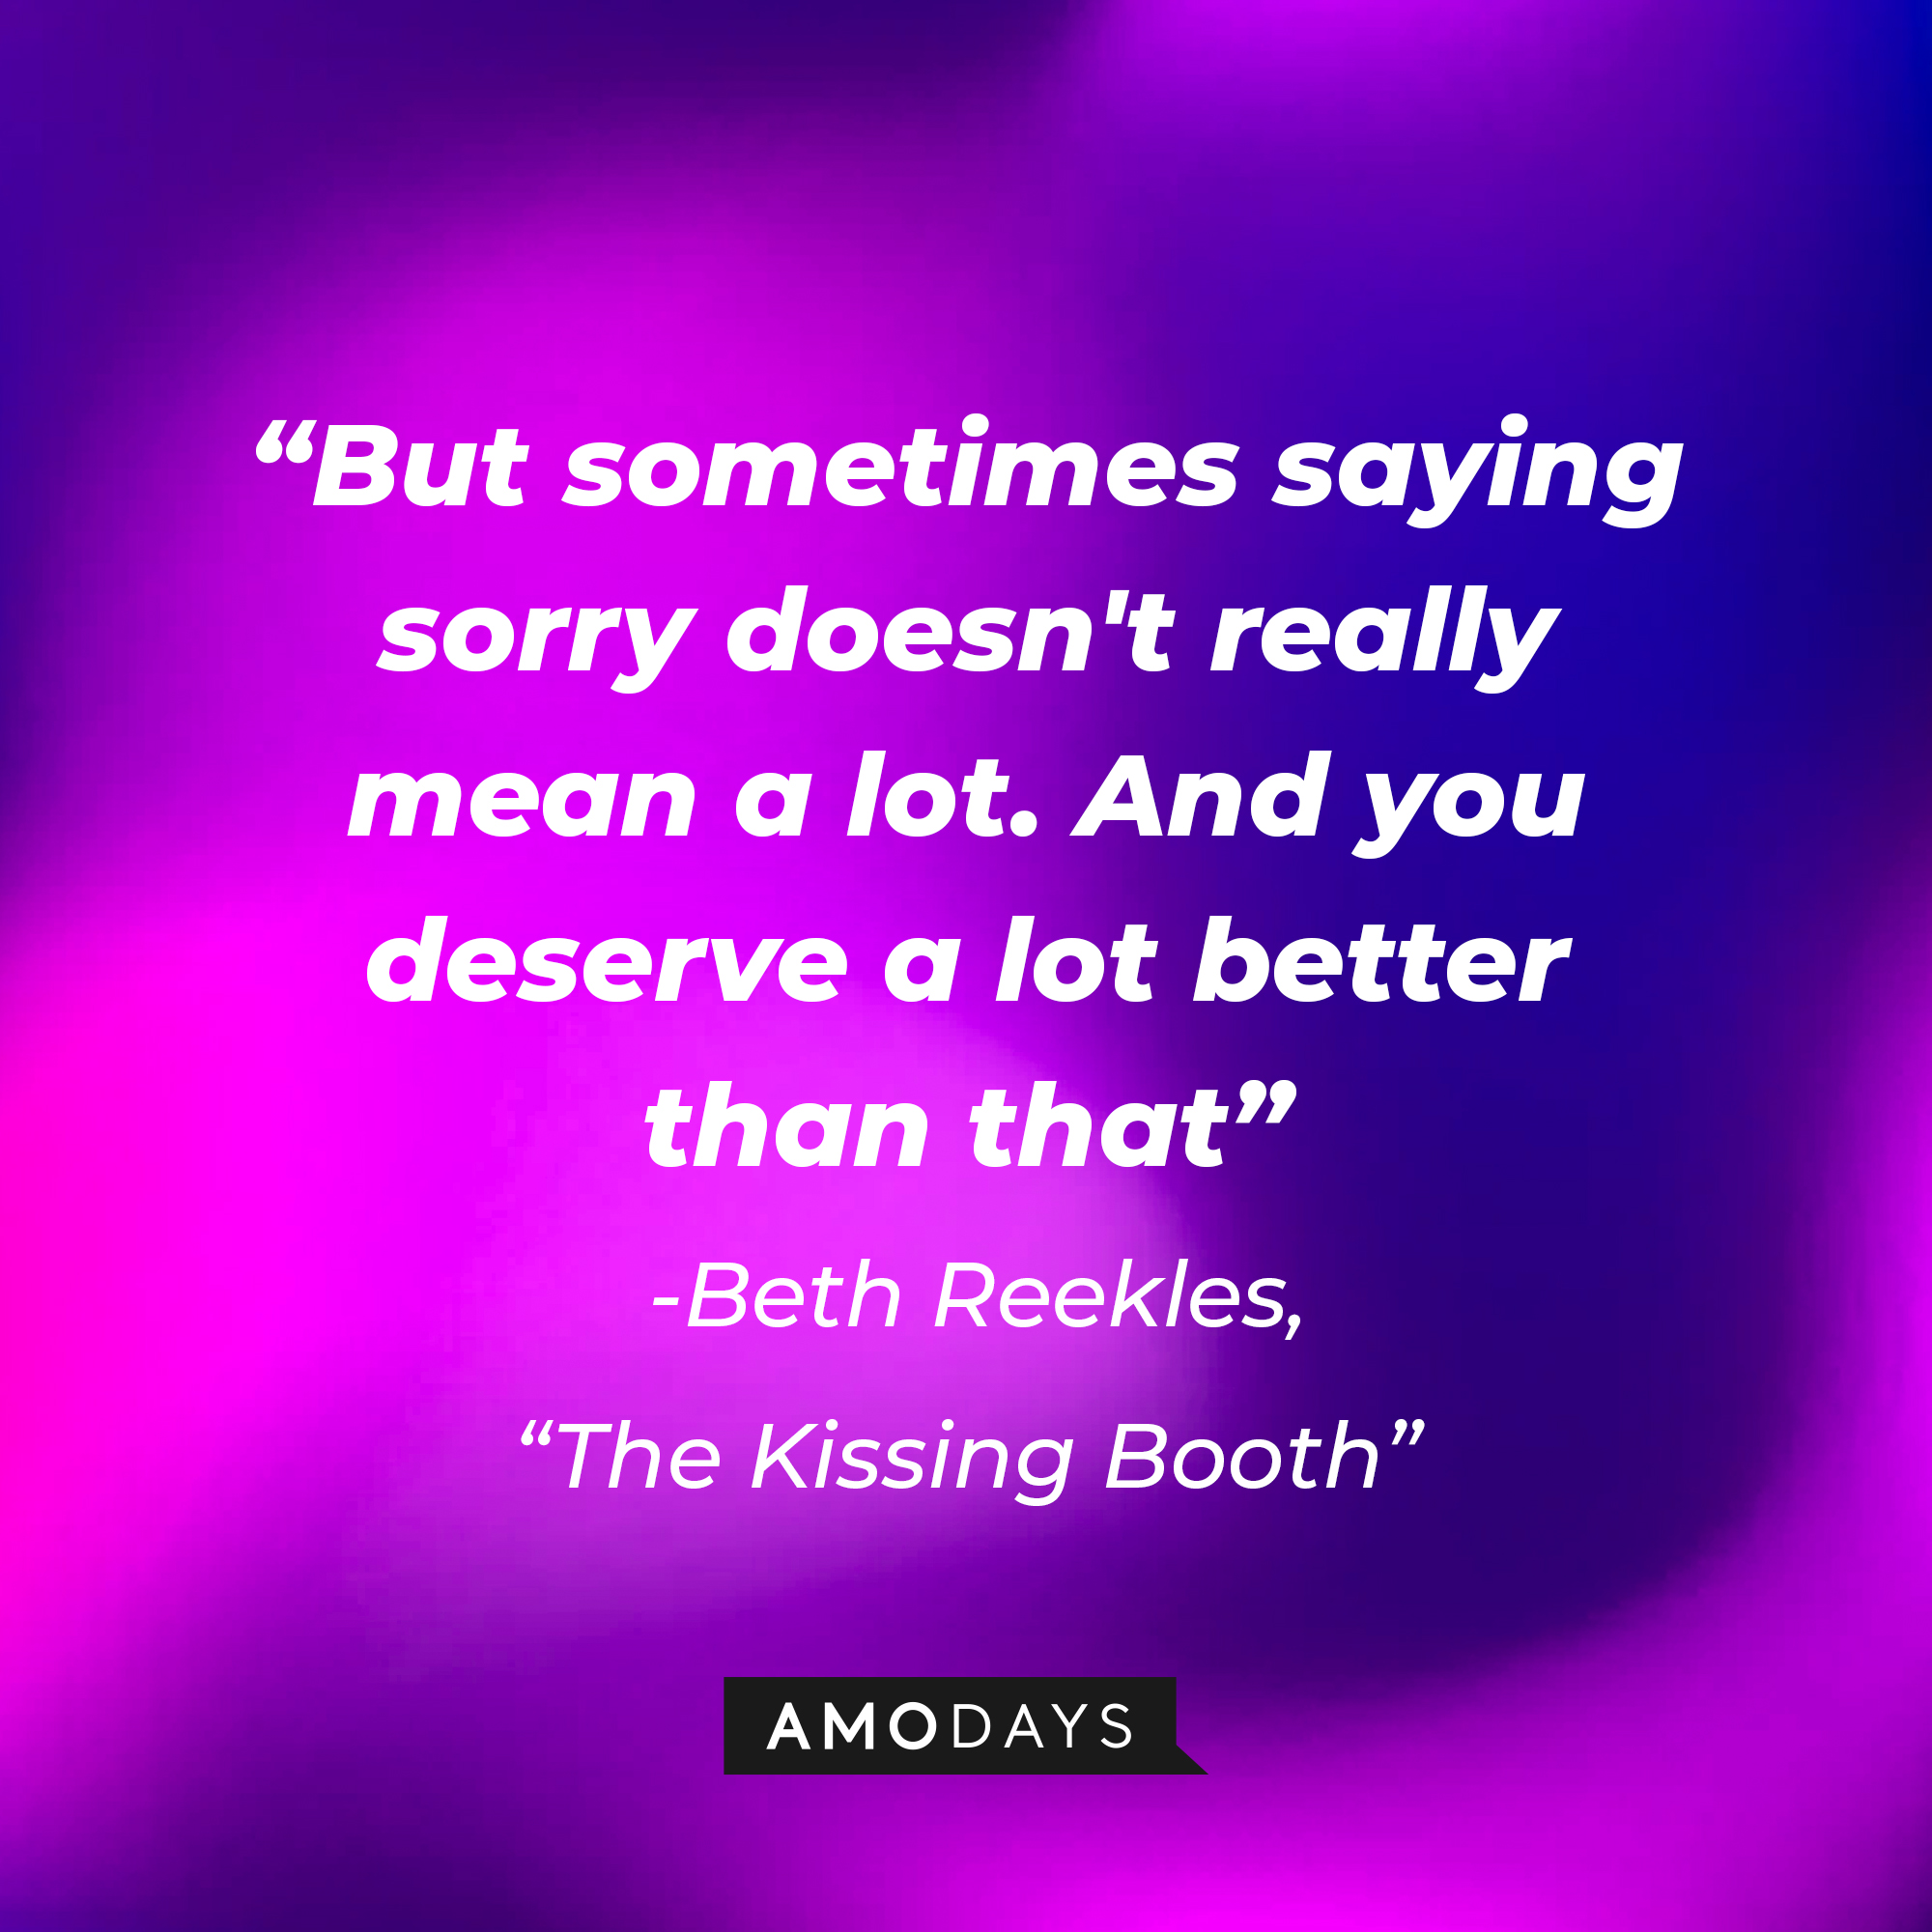 Beth Reekles’ quote: "But sometimes saying sorry doesn't really mean a lot. And you deserve a lot better than that." | Image: AmoDays